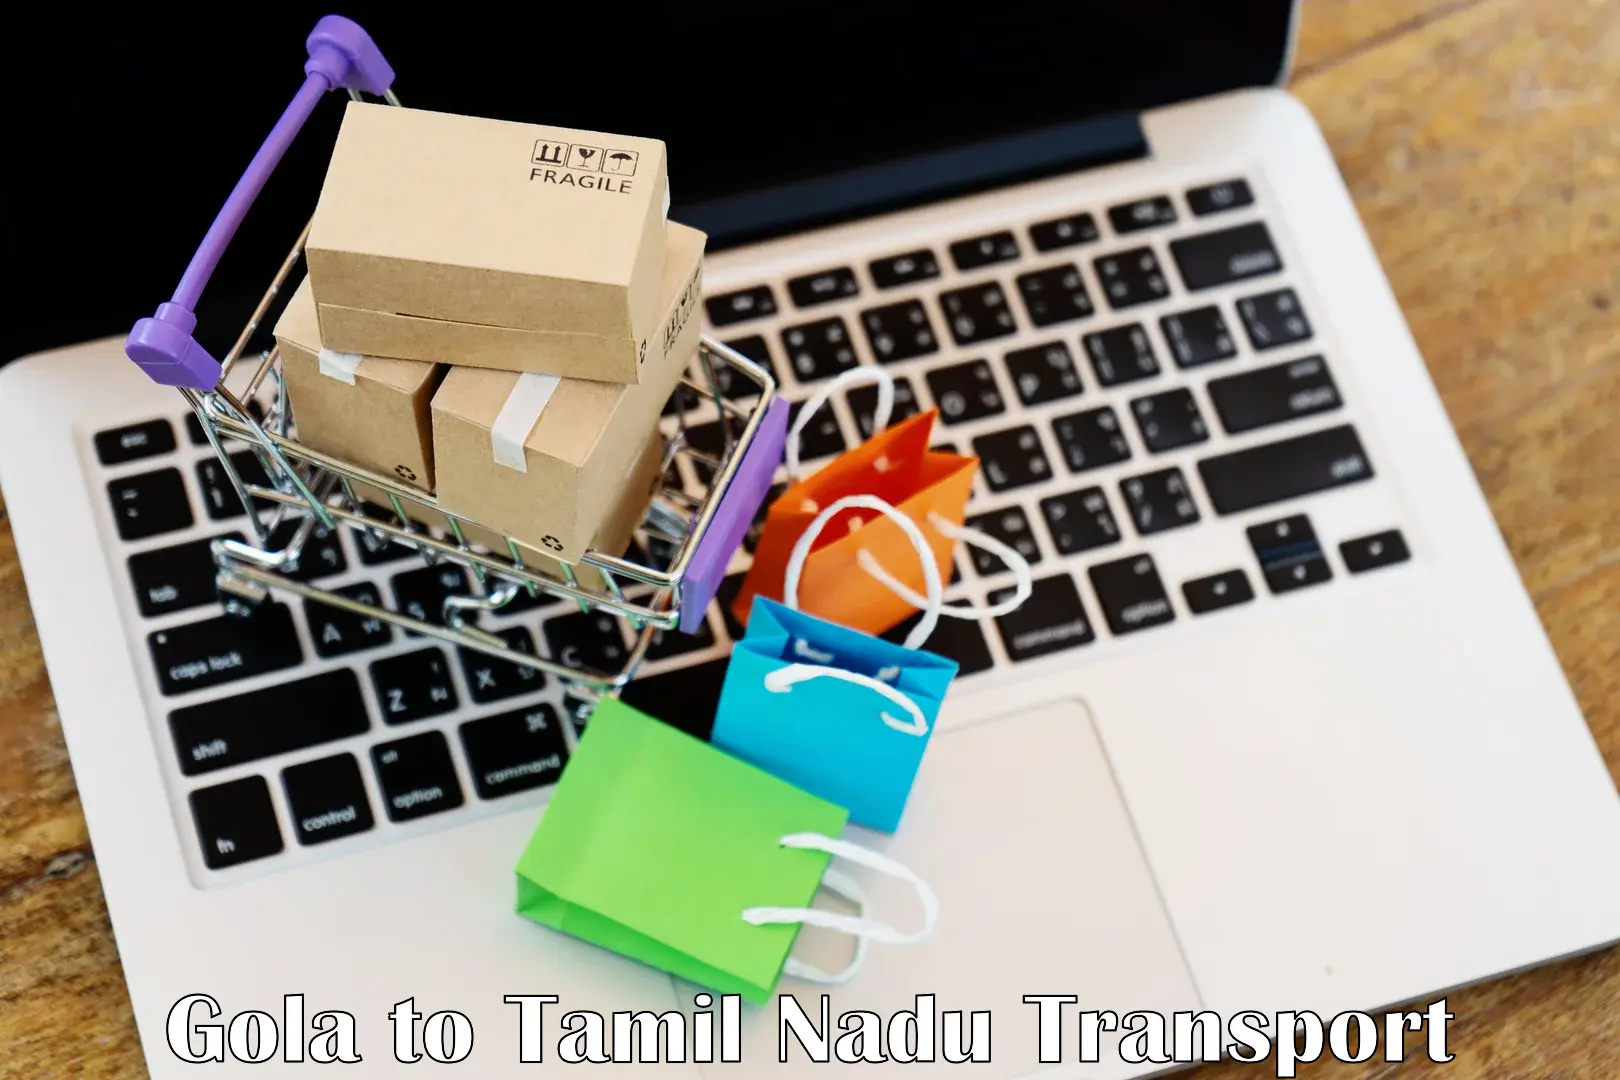 Goods delivery service Gola to Tamil Nadu